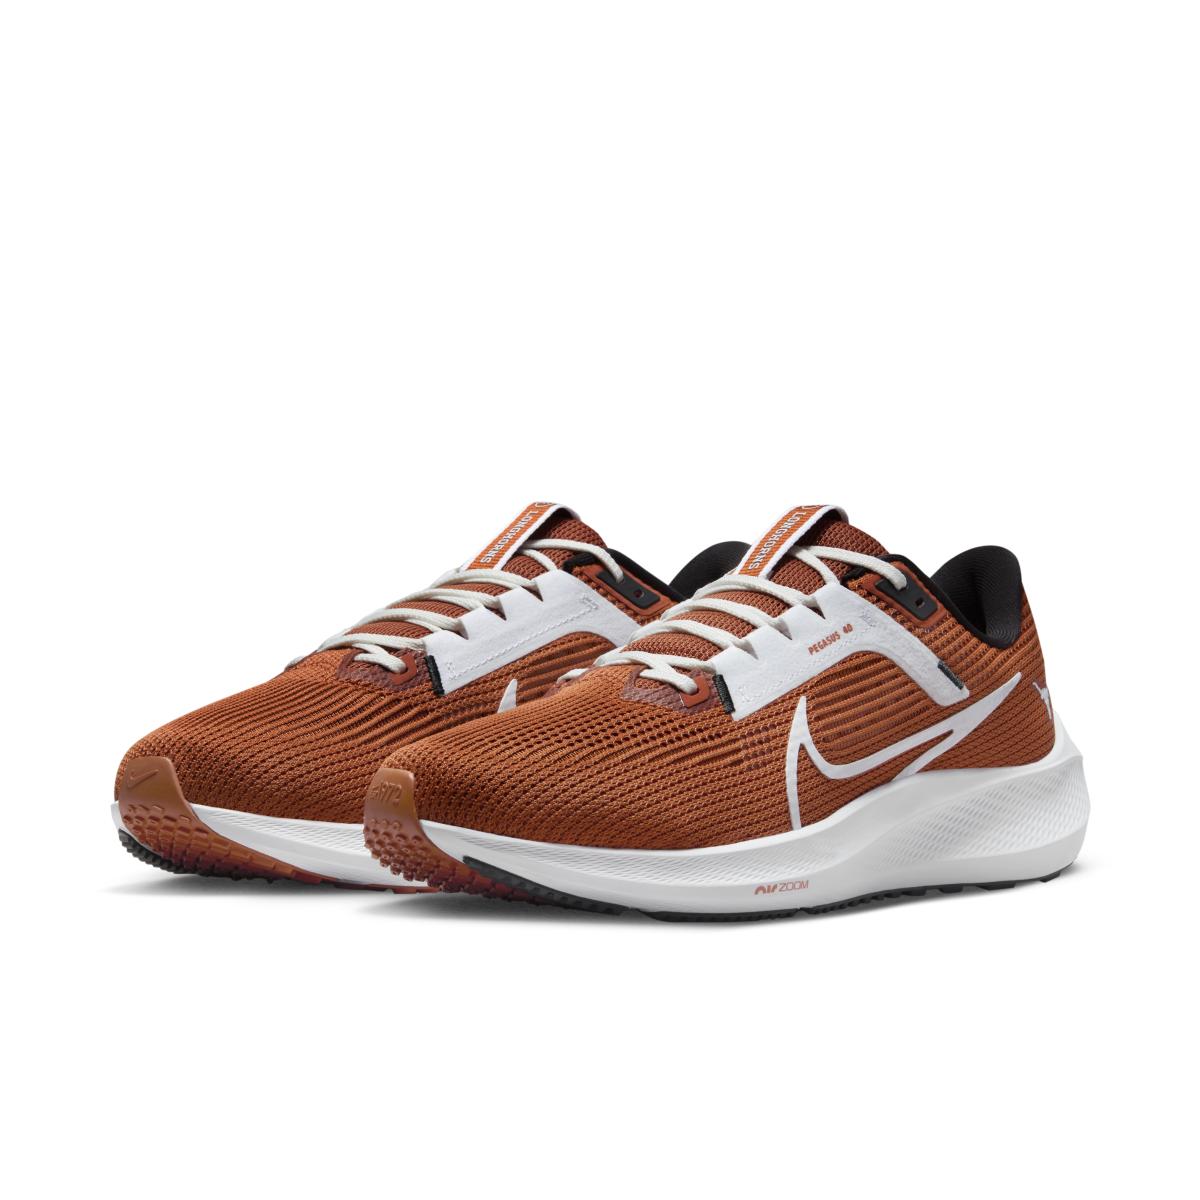 Texas Longhorns Nike Zoom Pegasus 40, how to buy - | A part of Sports Network